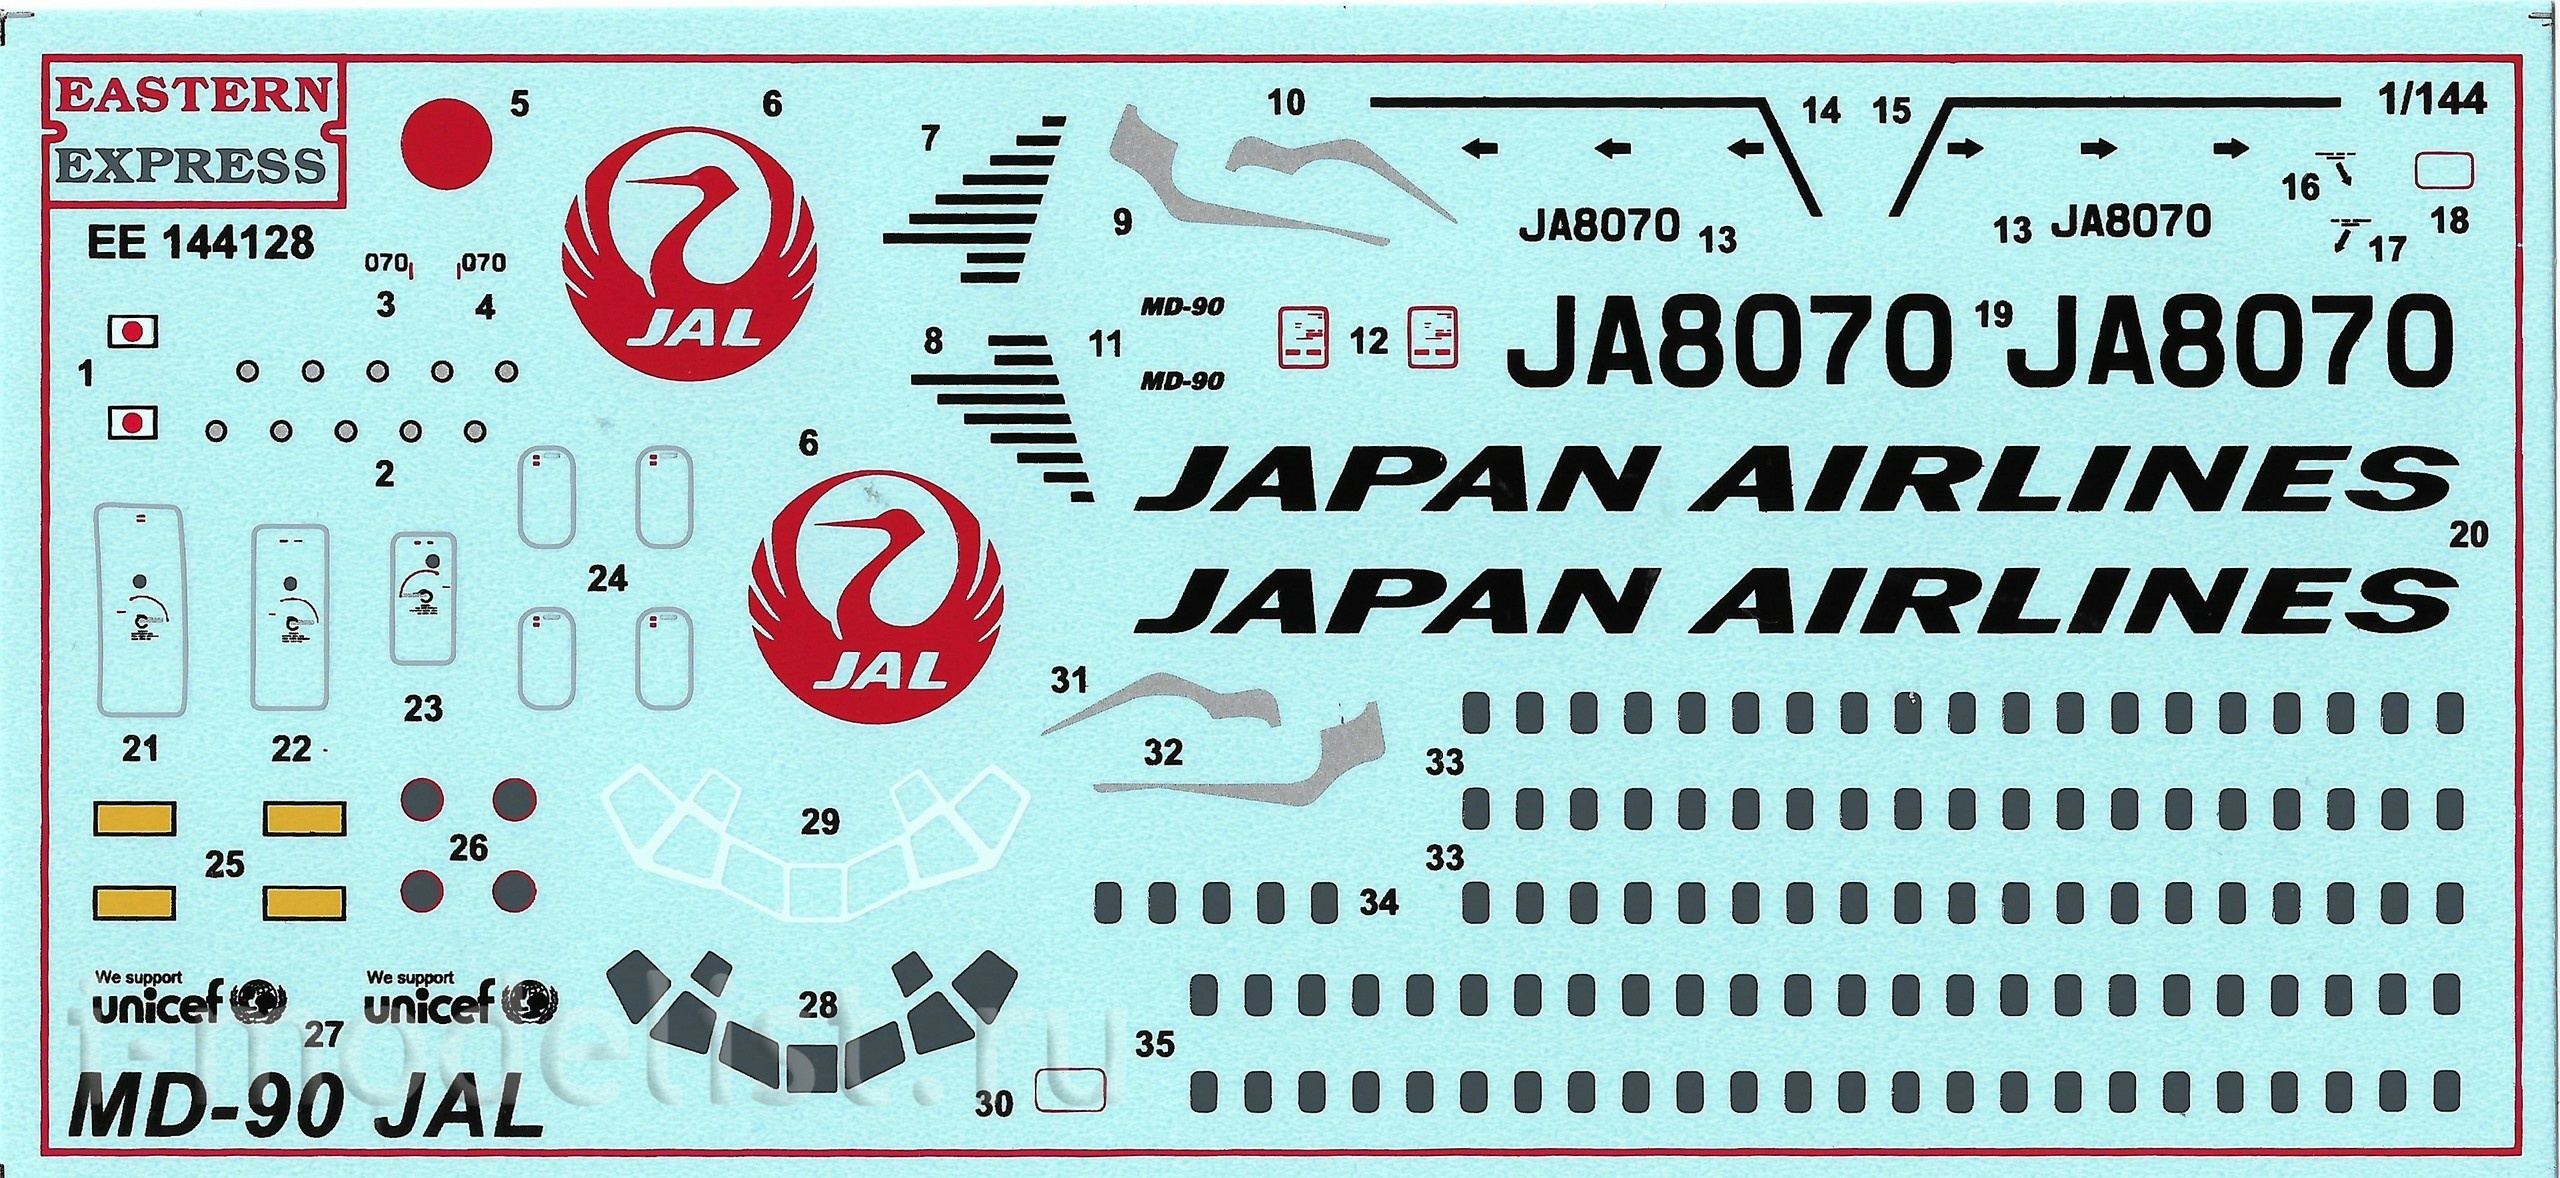 144128 Orient Express 1/144 MD-90 JAL Airliner